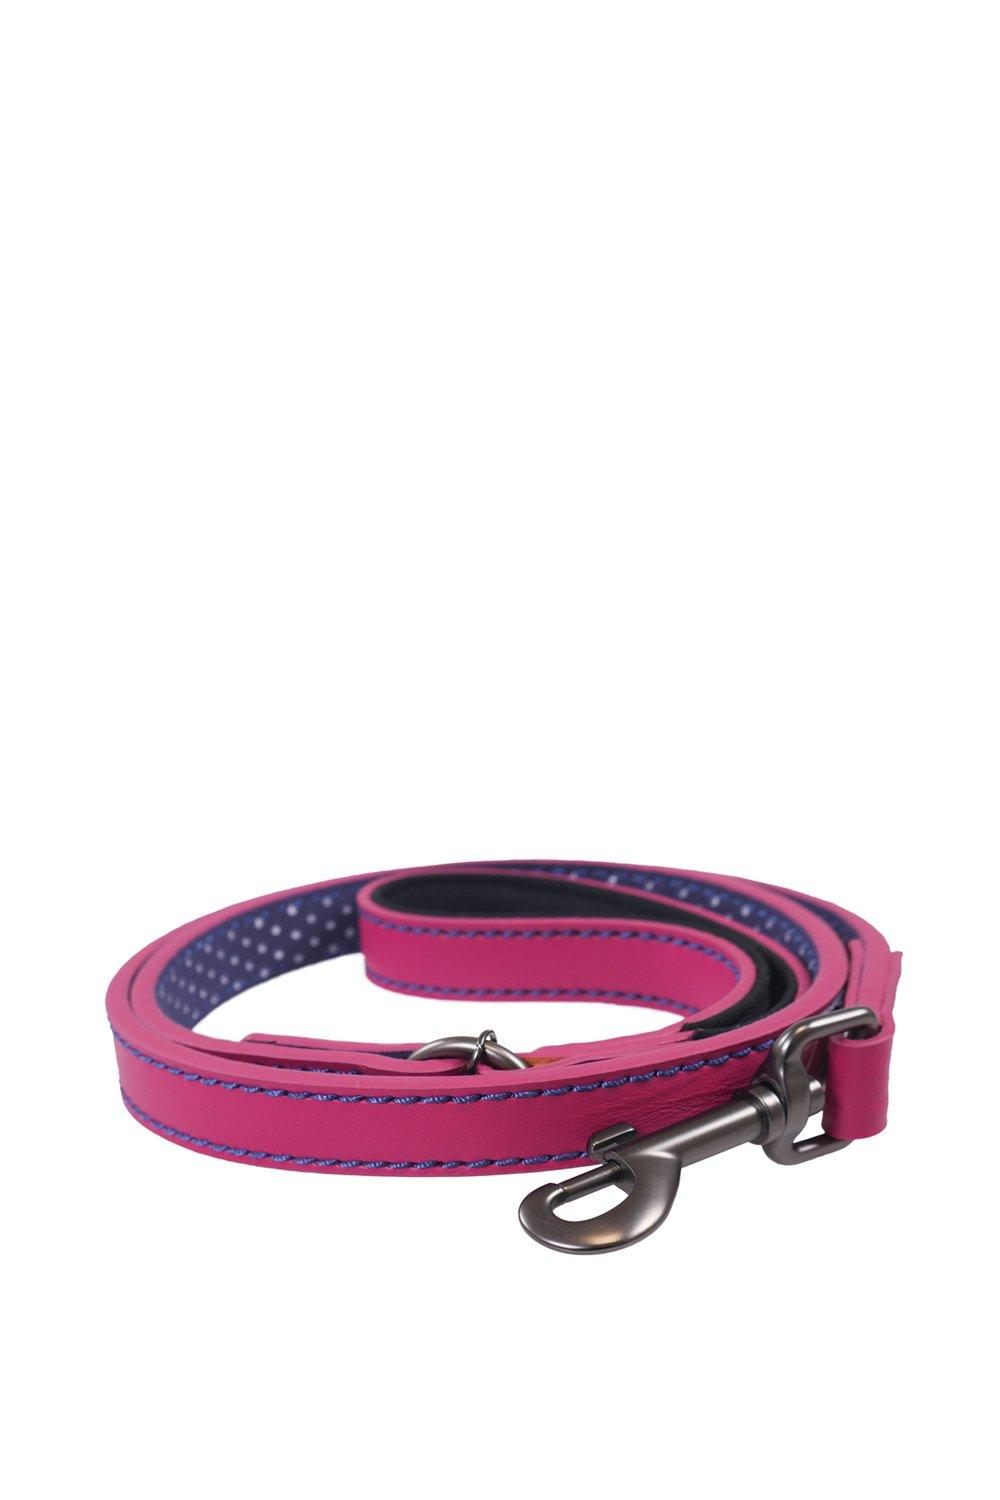 Picture of For Dapper Dogs Pink With Polka Dot Lining Leather Dog Lead With Padded Handle